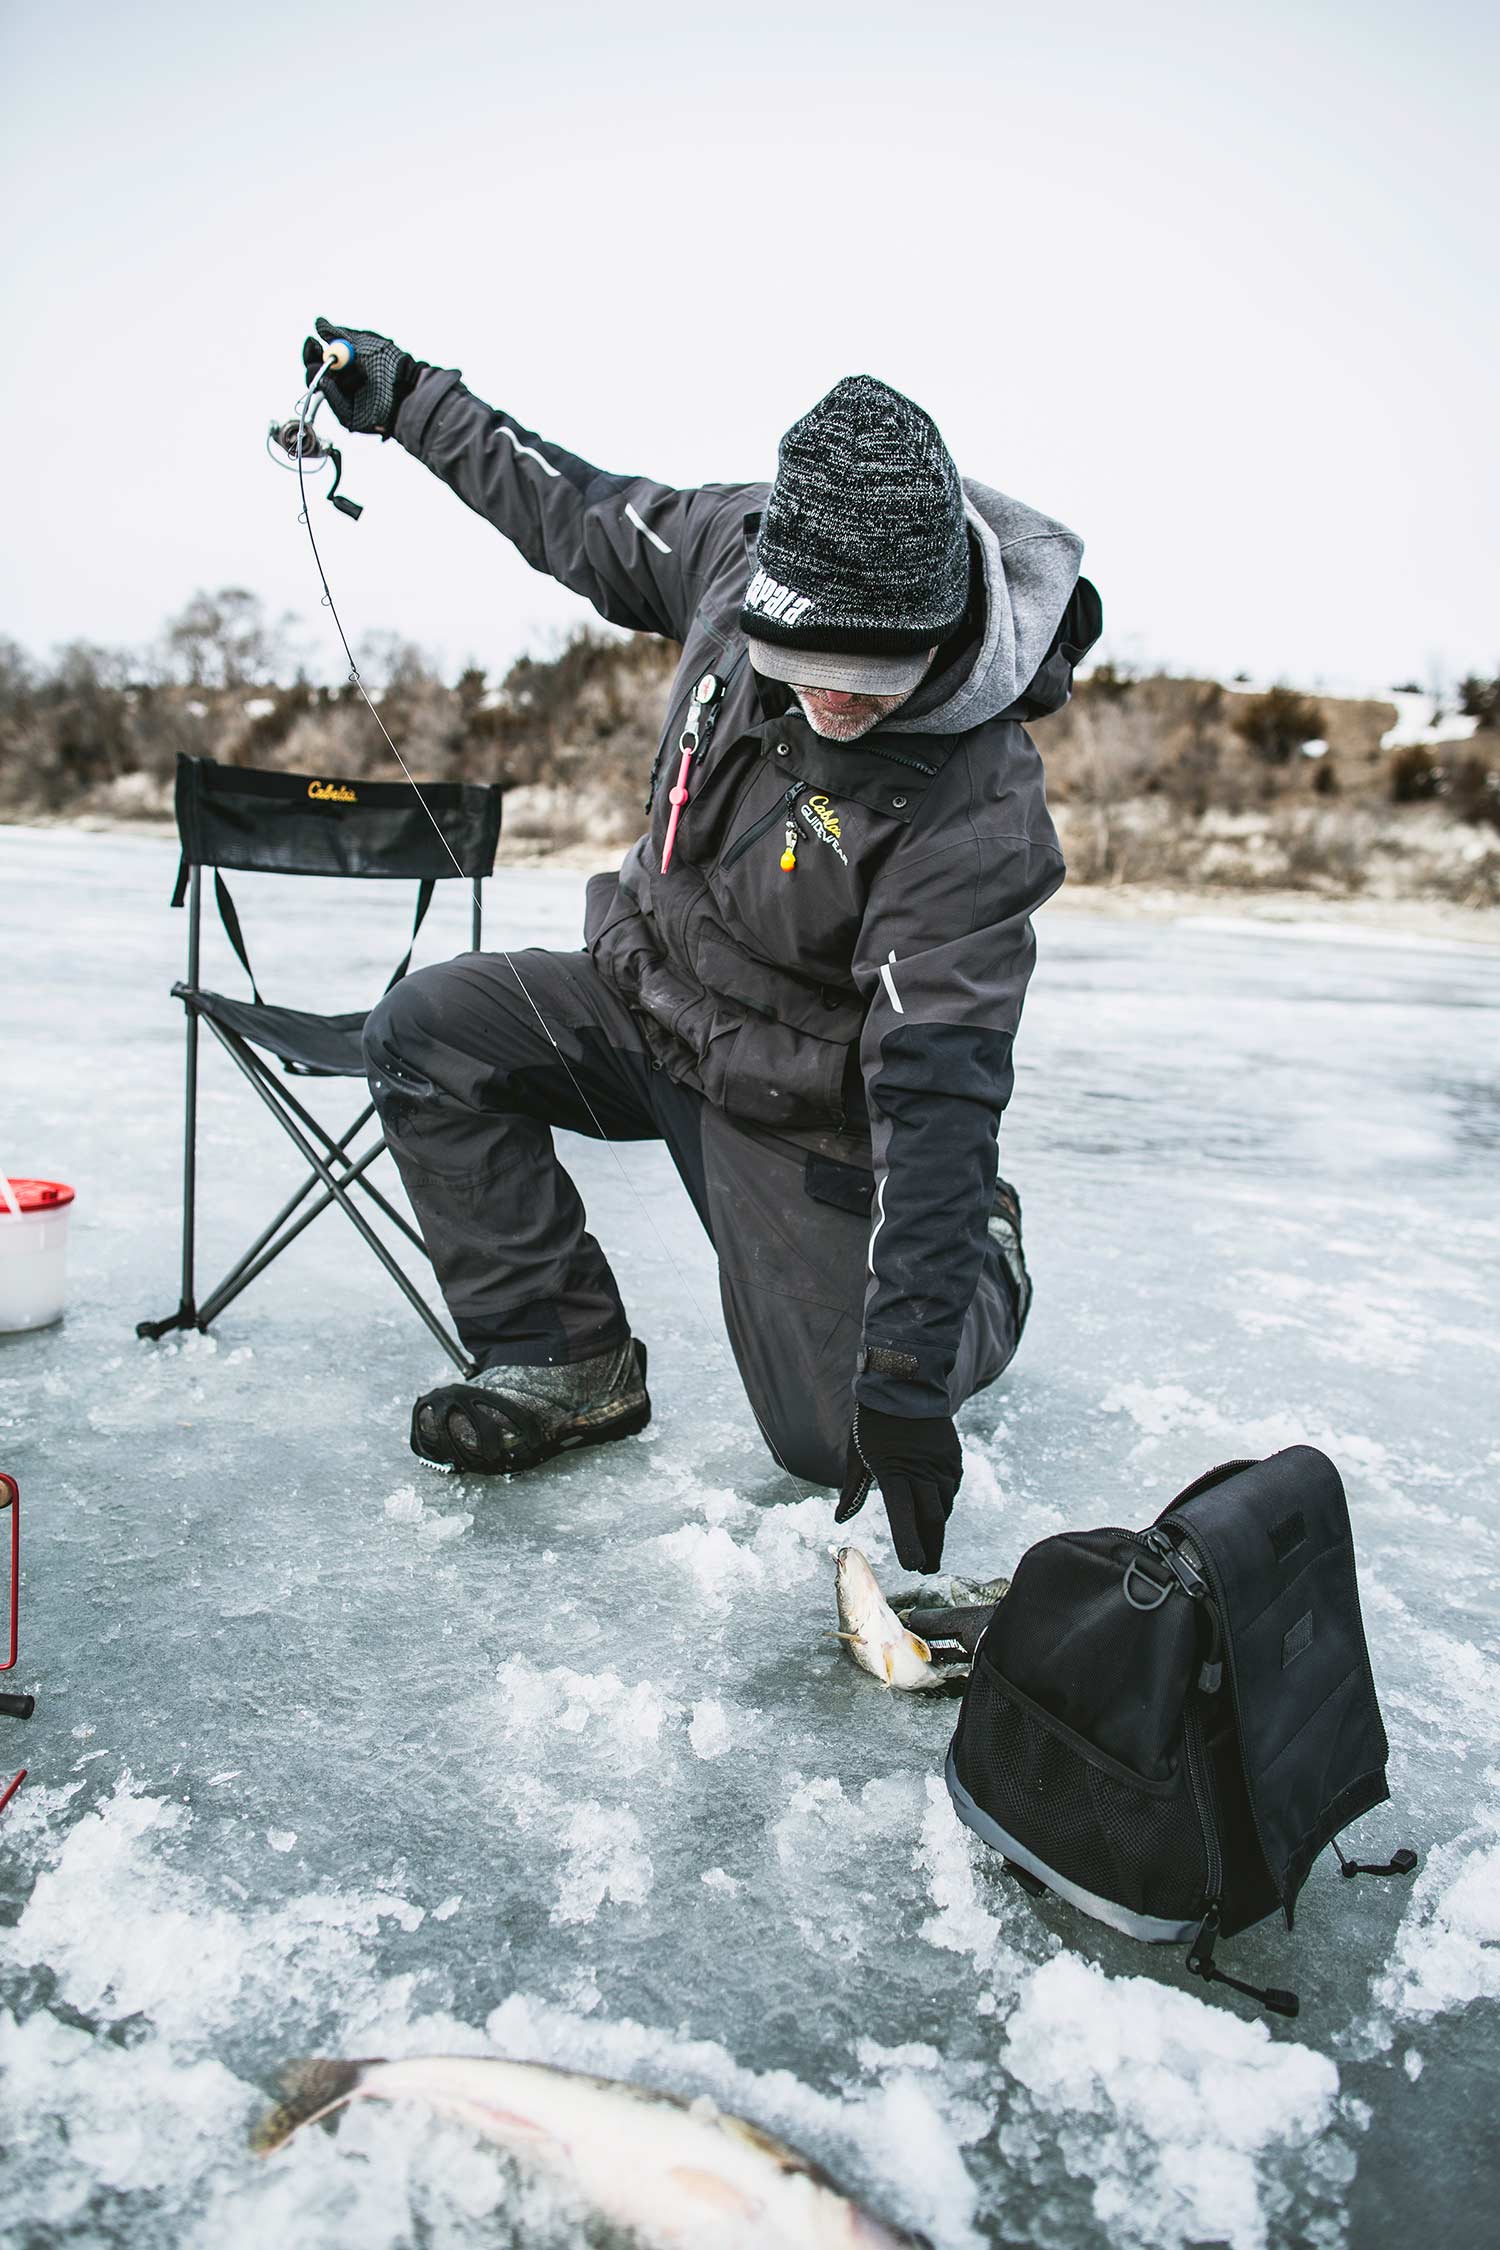 An angler pulls a walleye from an ice fishing hole.